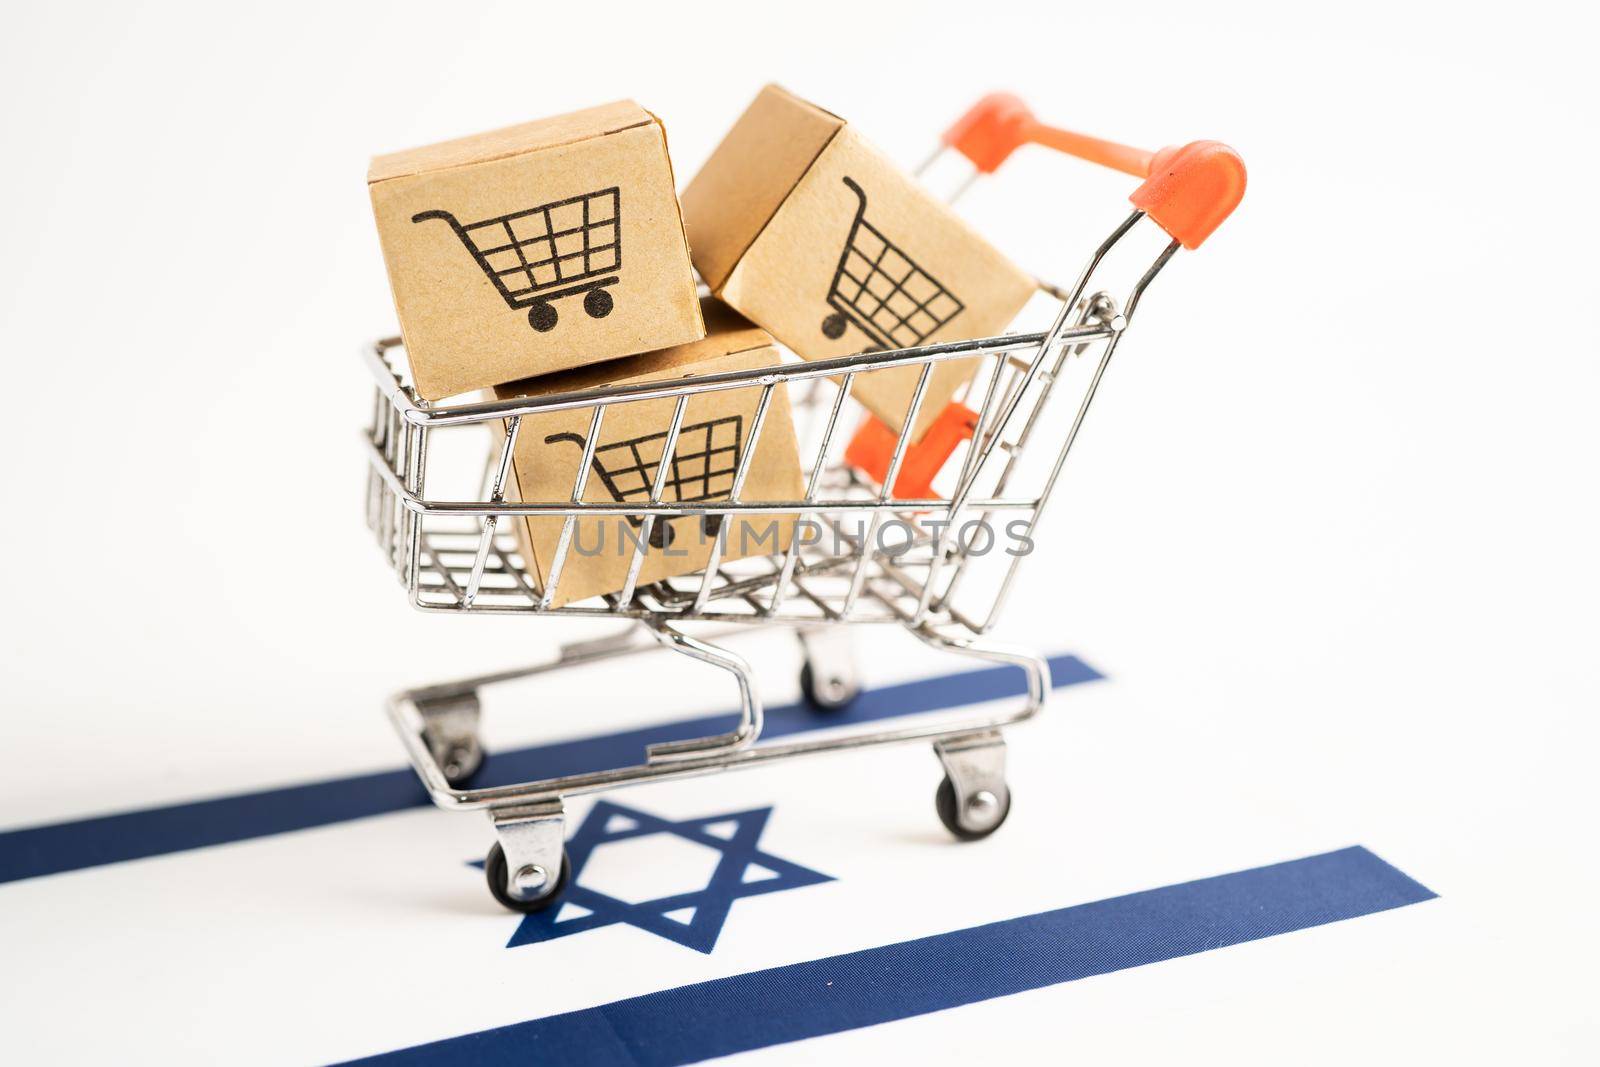 Box with shopping cart logo and Israel flag, Import Export Shopping online or eCommerce finance delivery service store product shipping, trade, supplier concept.